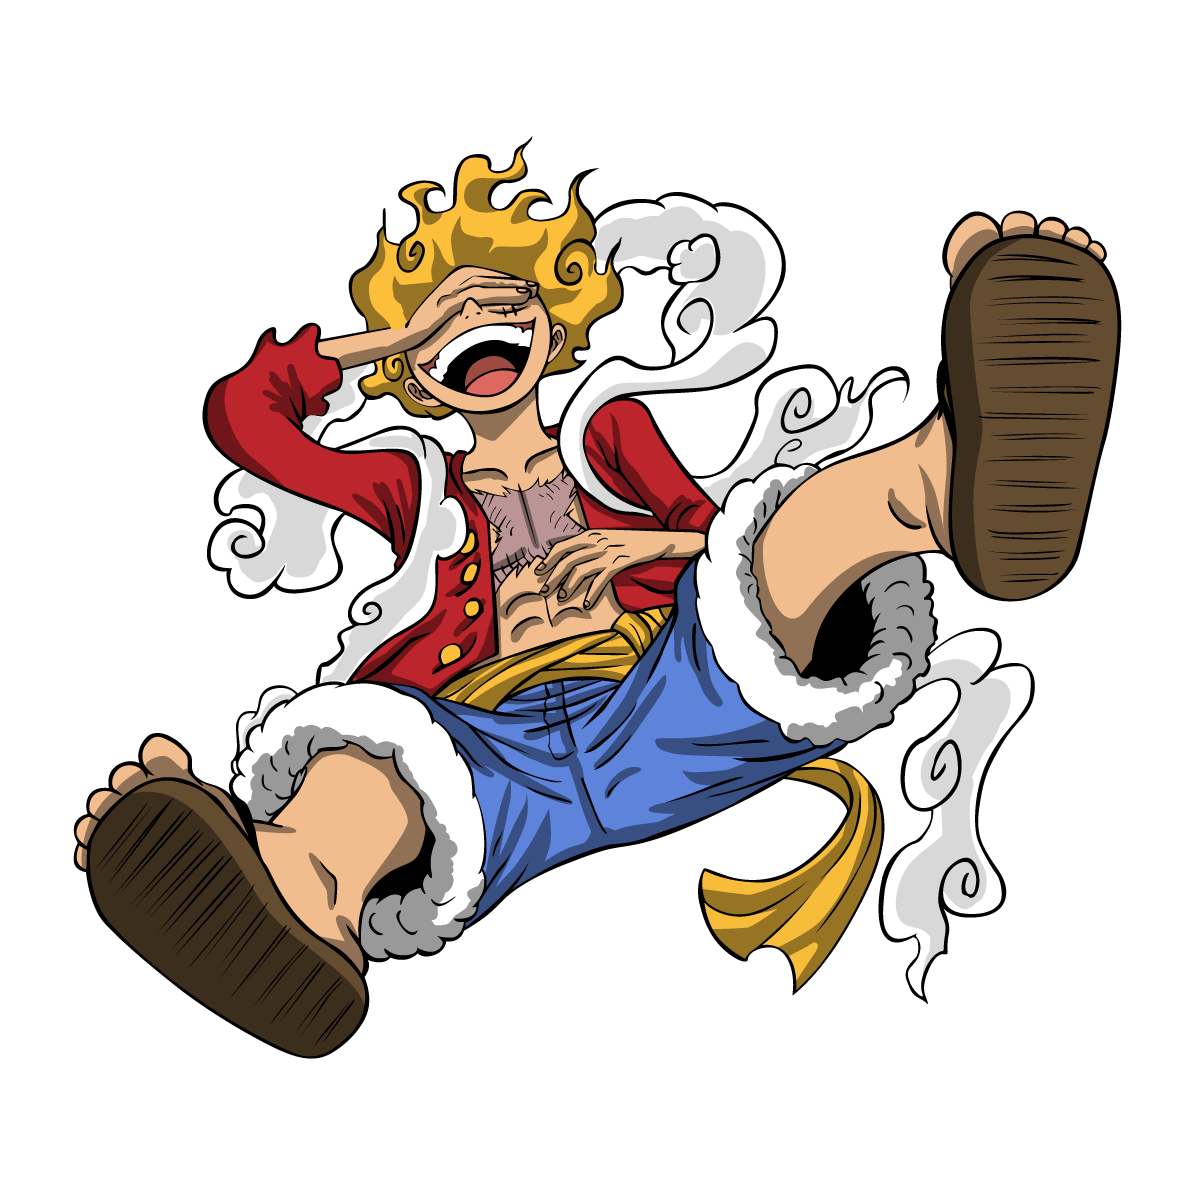 Luffy Gear 5 sitting PNG Image